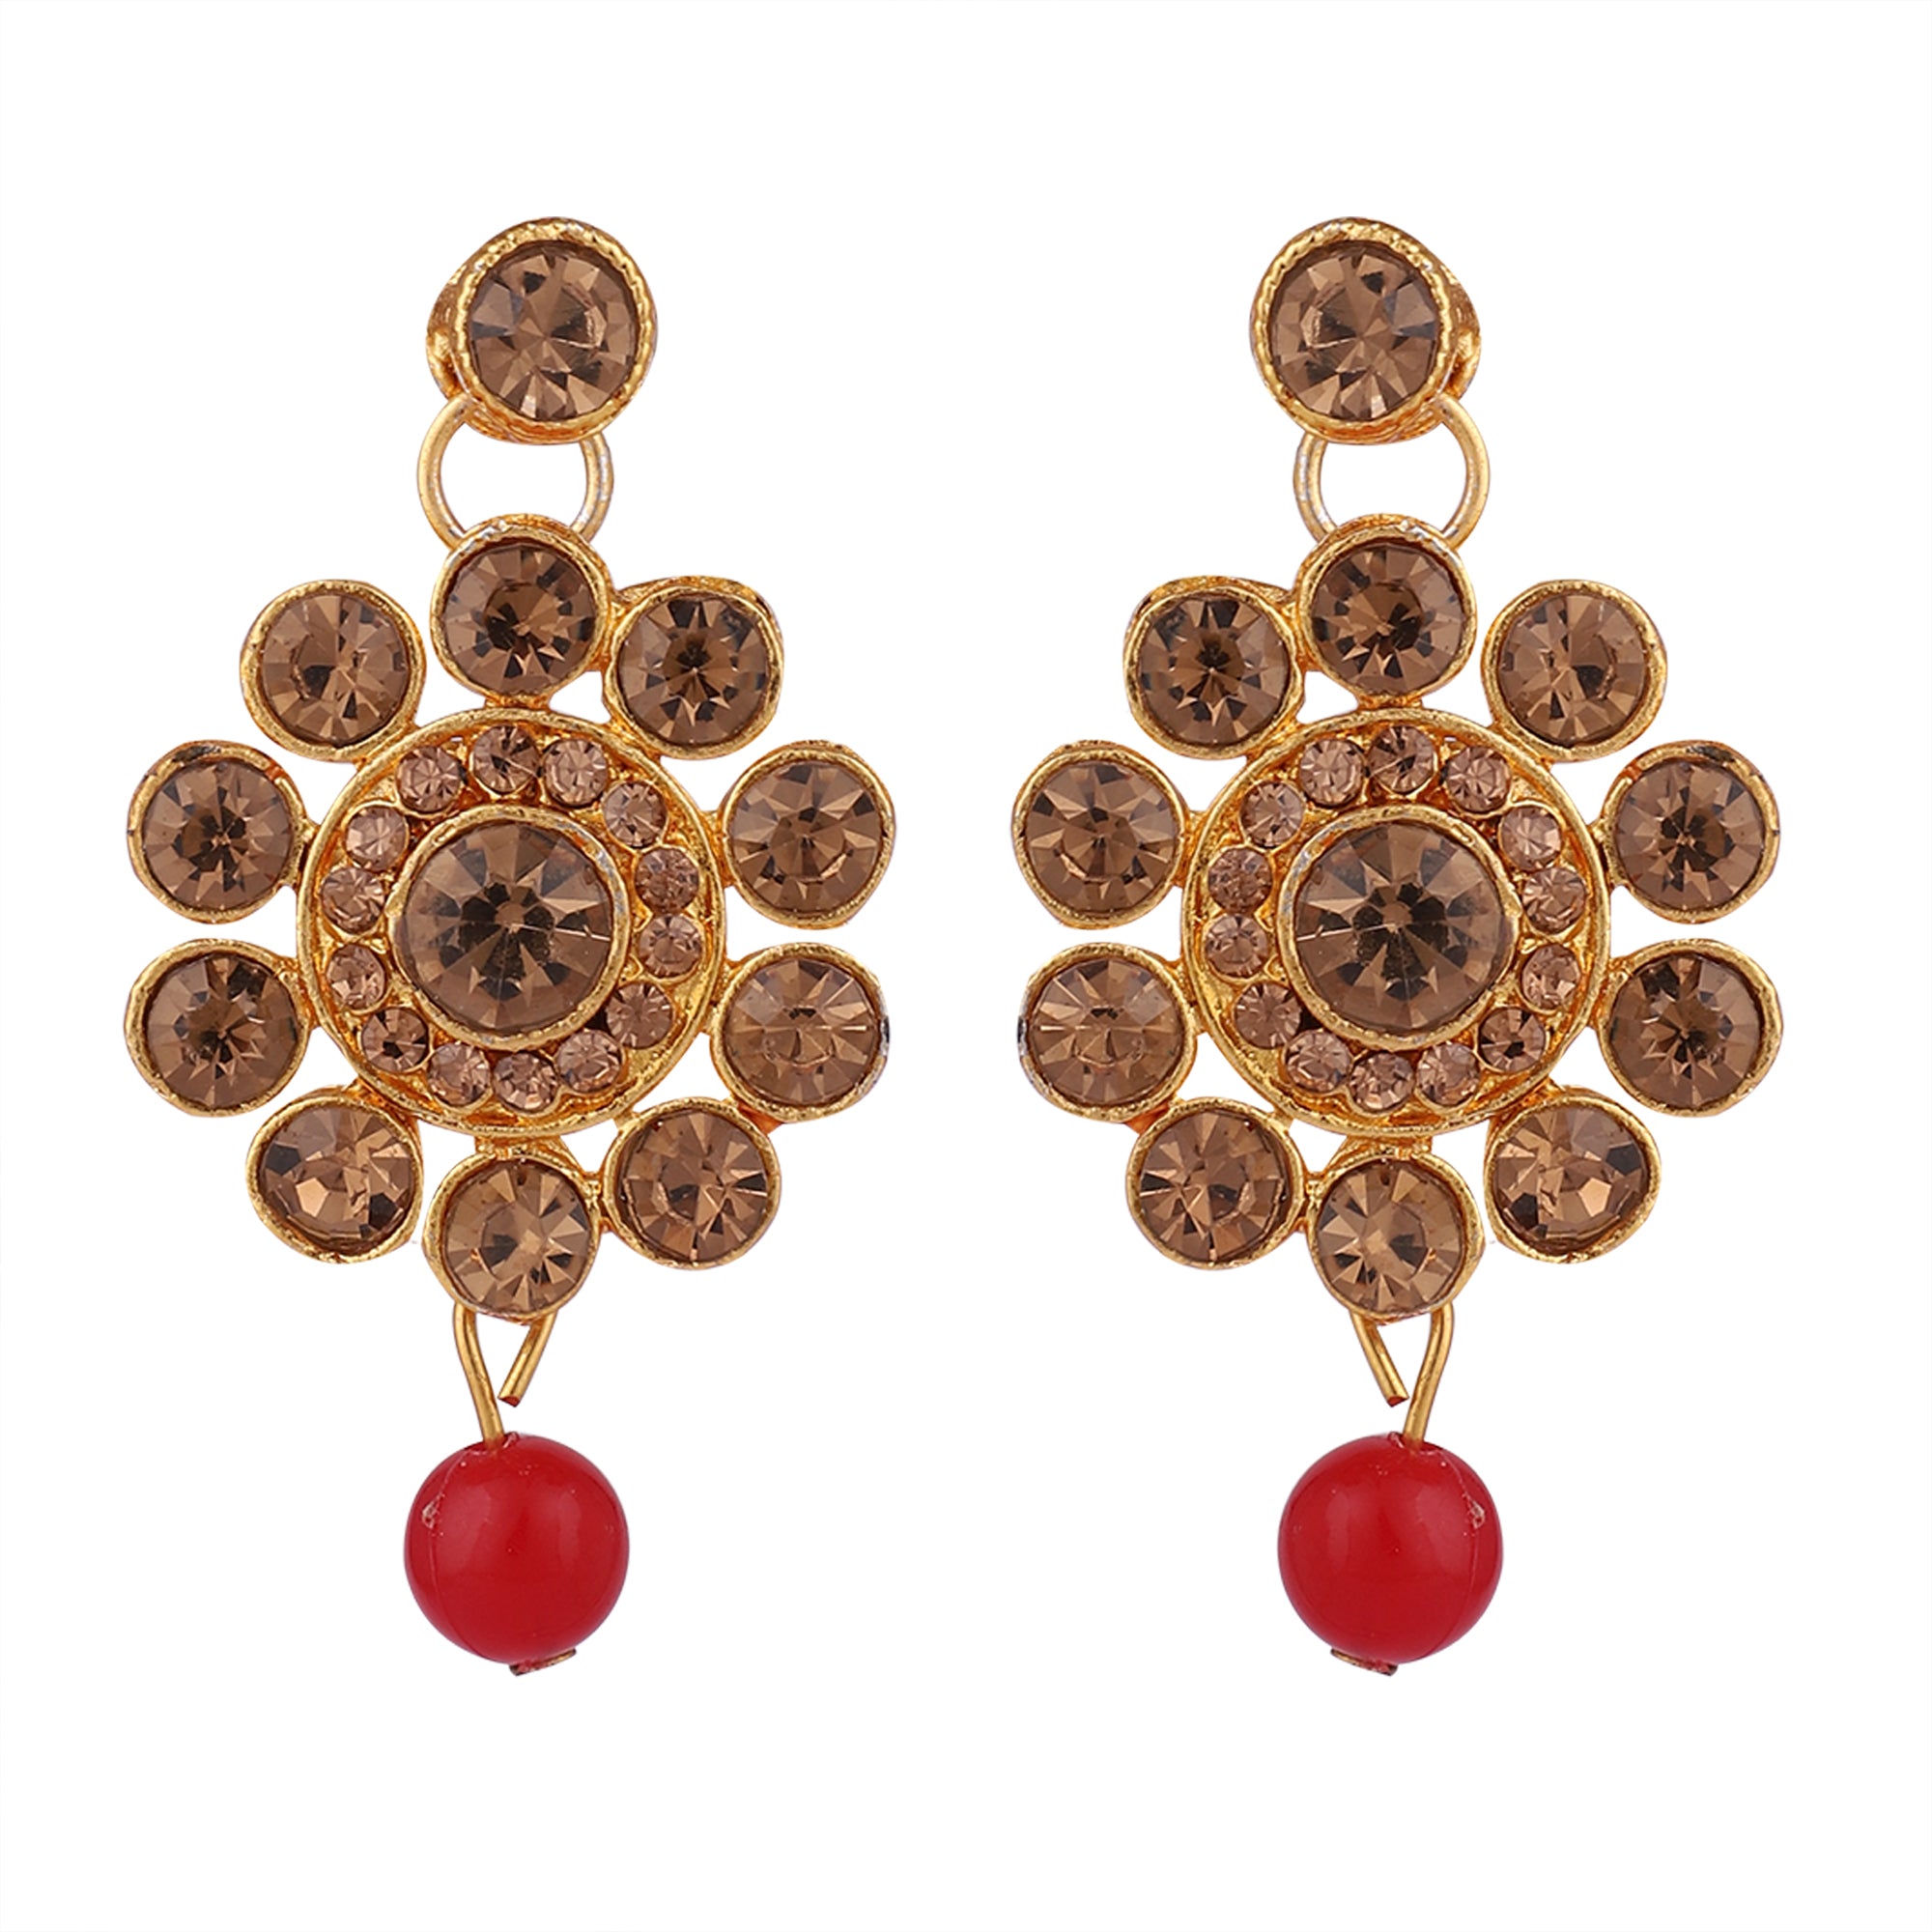 Women's Trending Red Choker Set With Maang Tikka  - Zaffre Collections